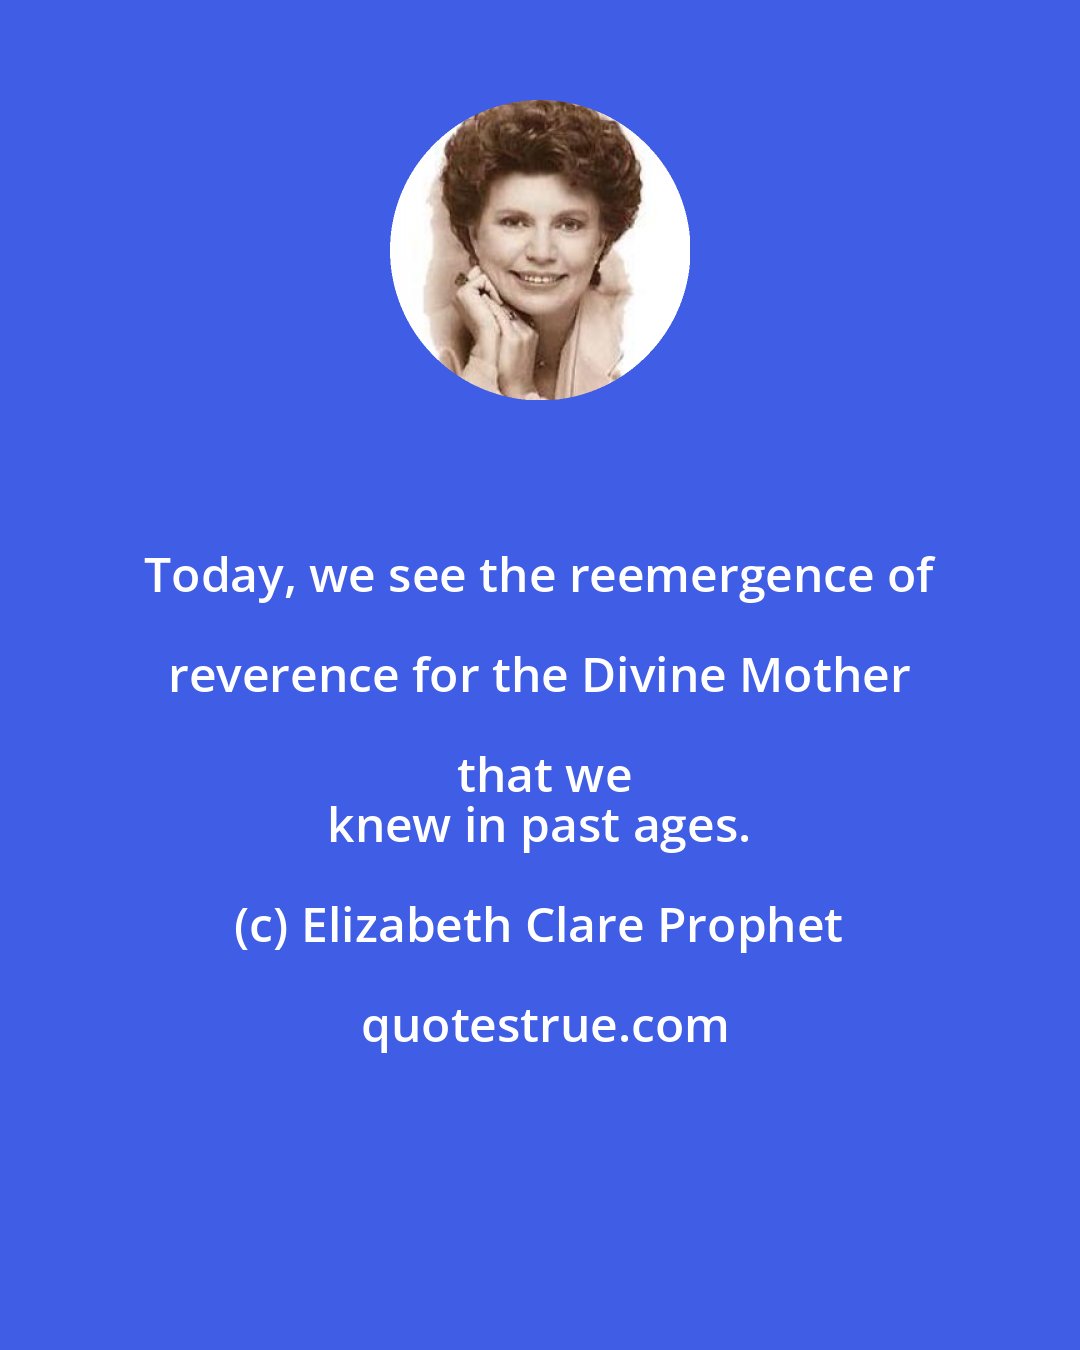 Elizabeth Clare Prophet: Today, we see the reemergence of reverence for the Divine Mother that we
 knew in past ages.